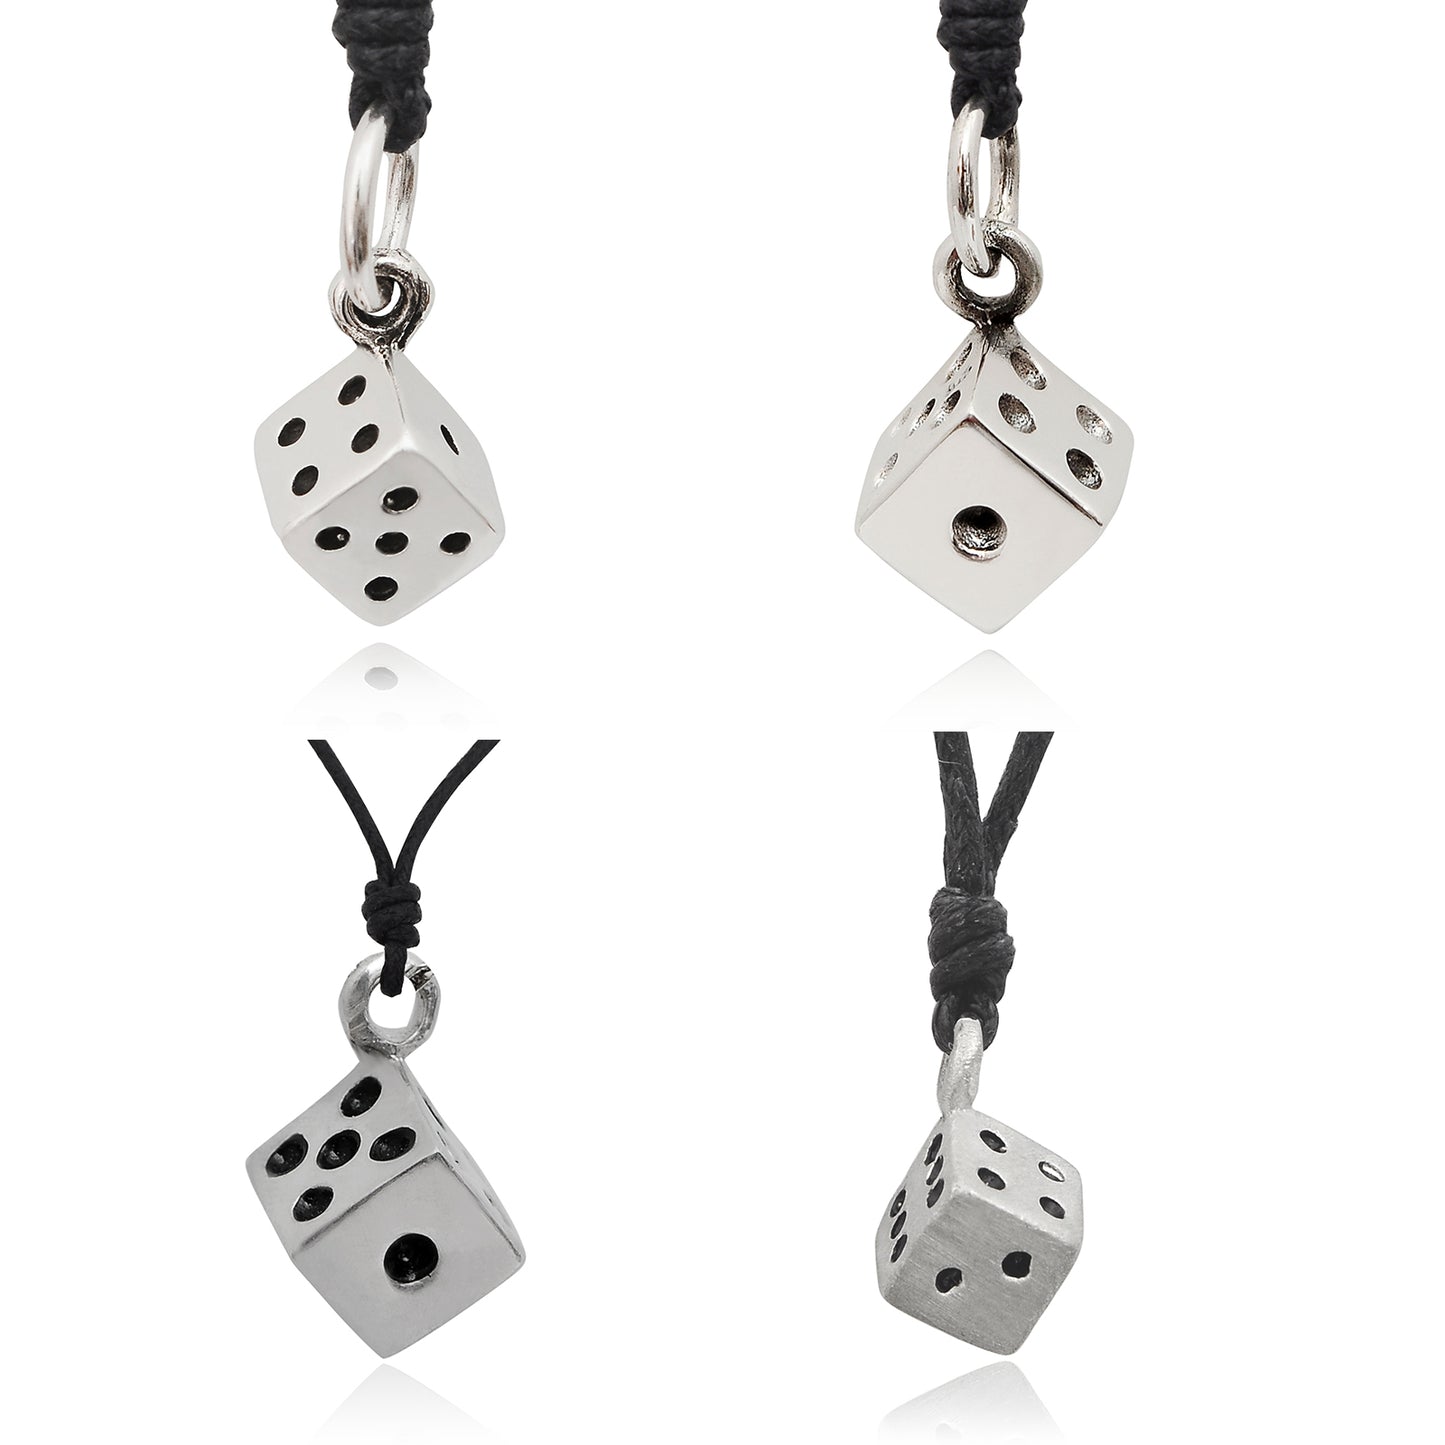 Dice Gambler 92.5 Sterling Silver Pewter Charm Necklace Pendant Jewelry